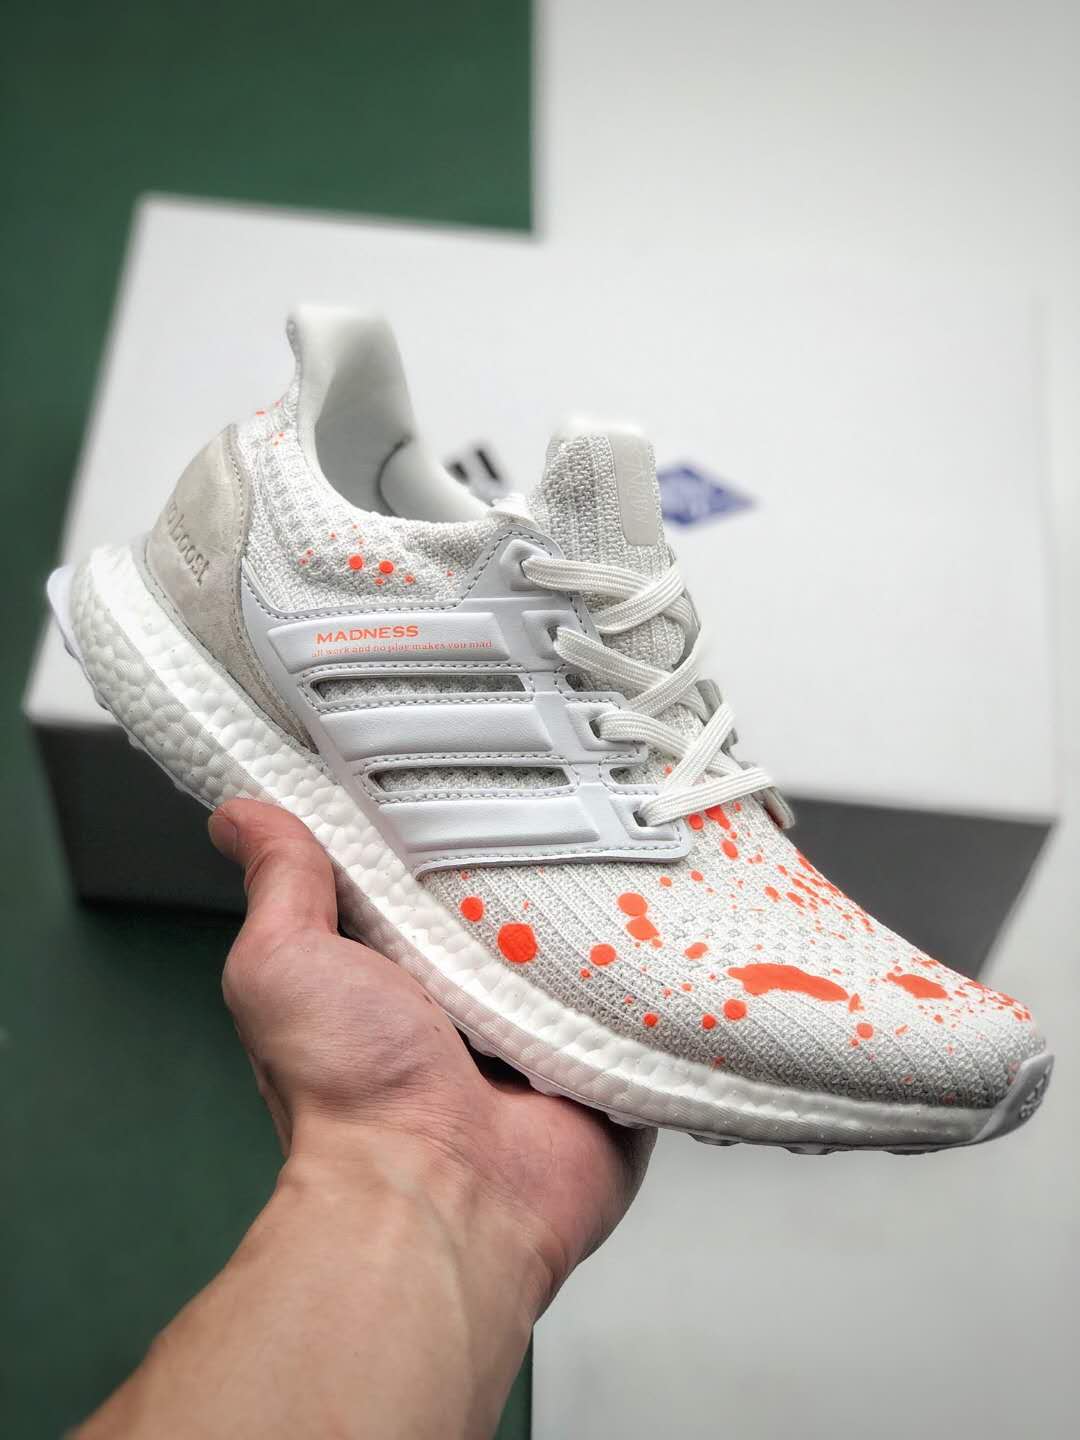 Adidas Madness x UltraBoost 4.0 'White' EF0143 - Shop Now!